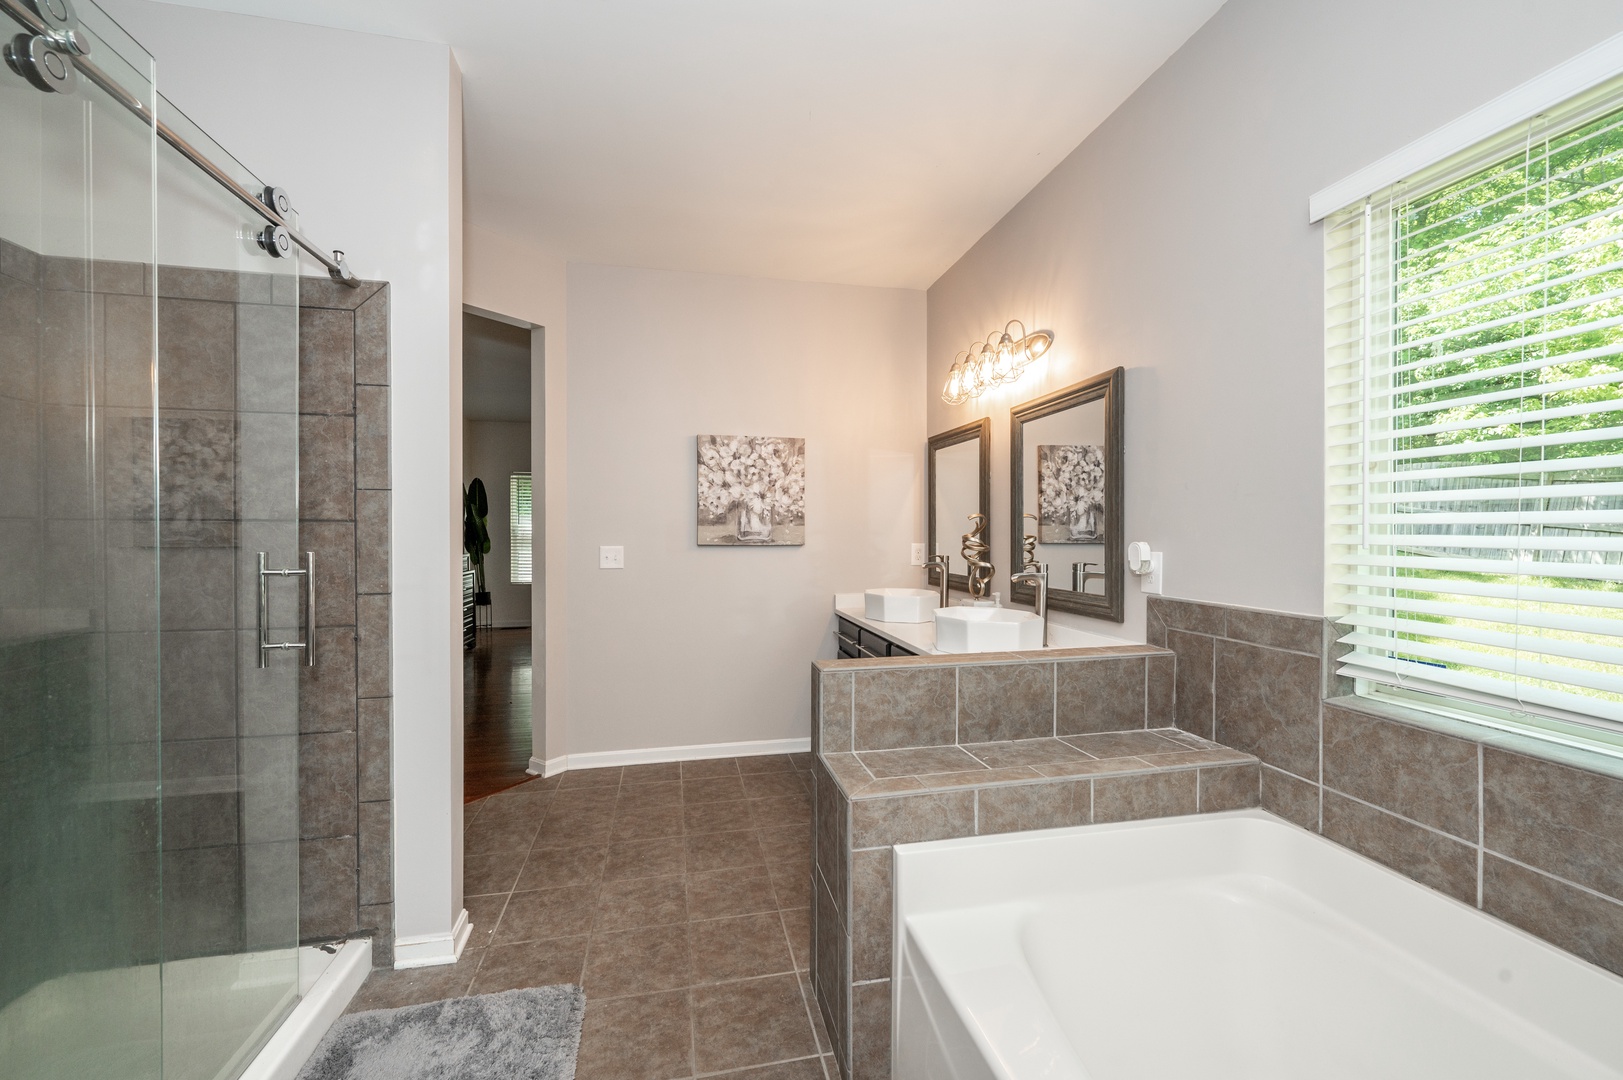 The 1st floor king en suite offers a chic double vanity, shower, & soaking tub